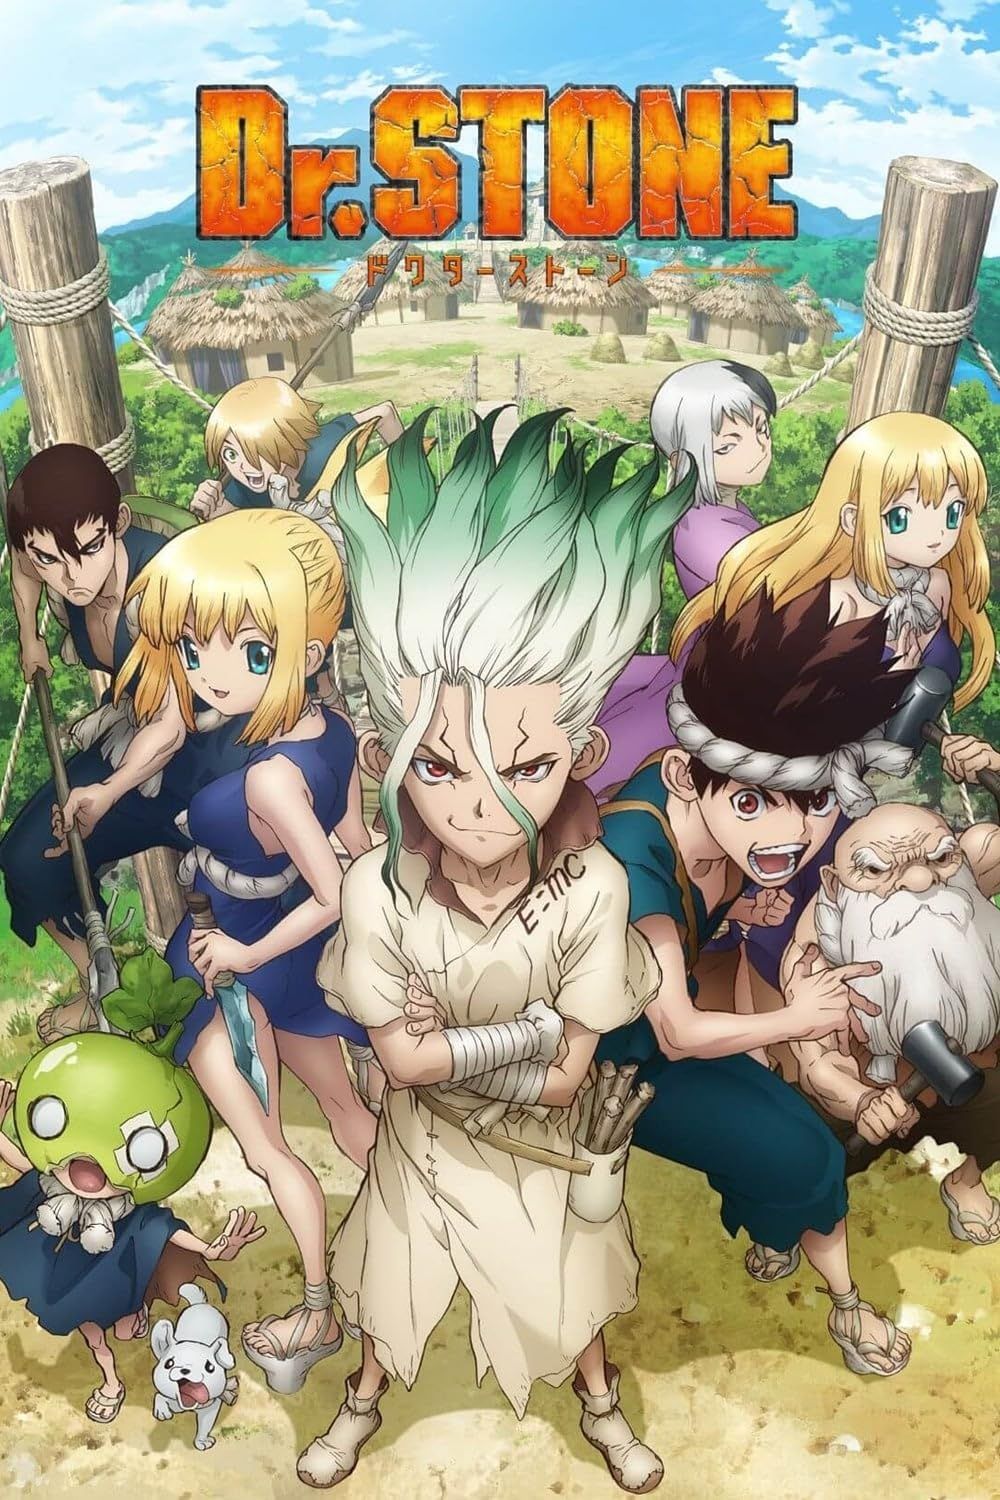 Dr. Stone Season 3: The heroes will start a voyage to find the